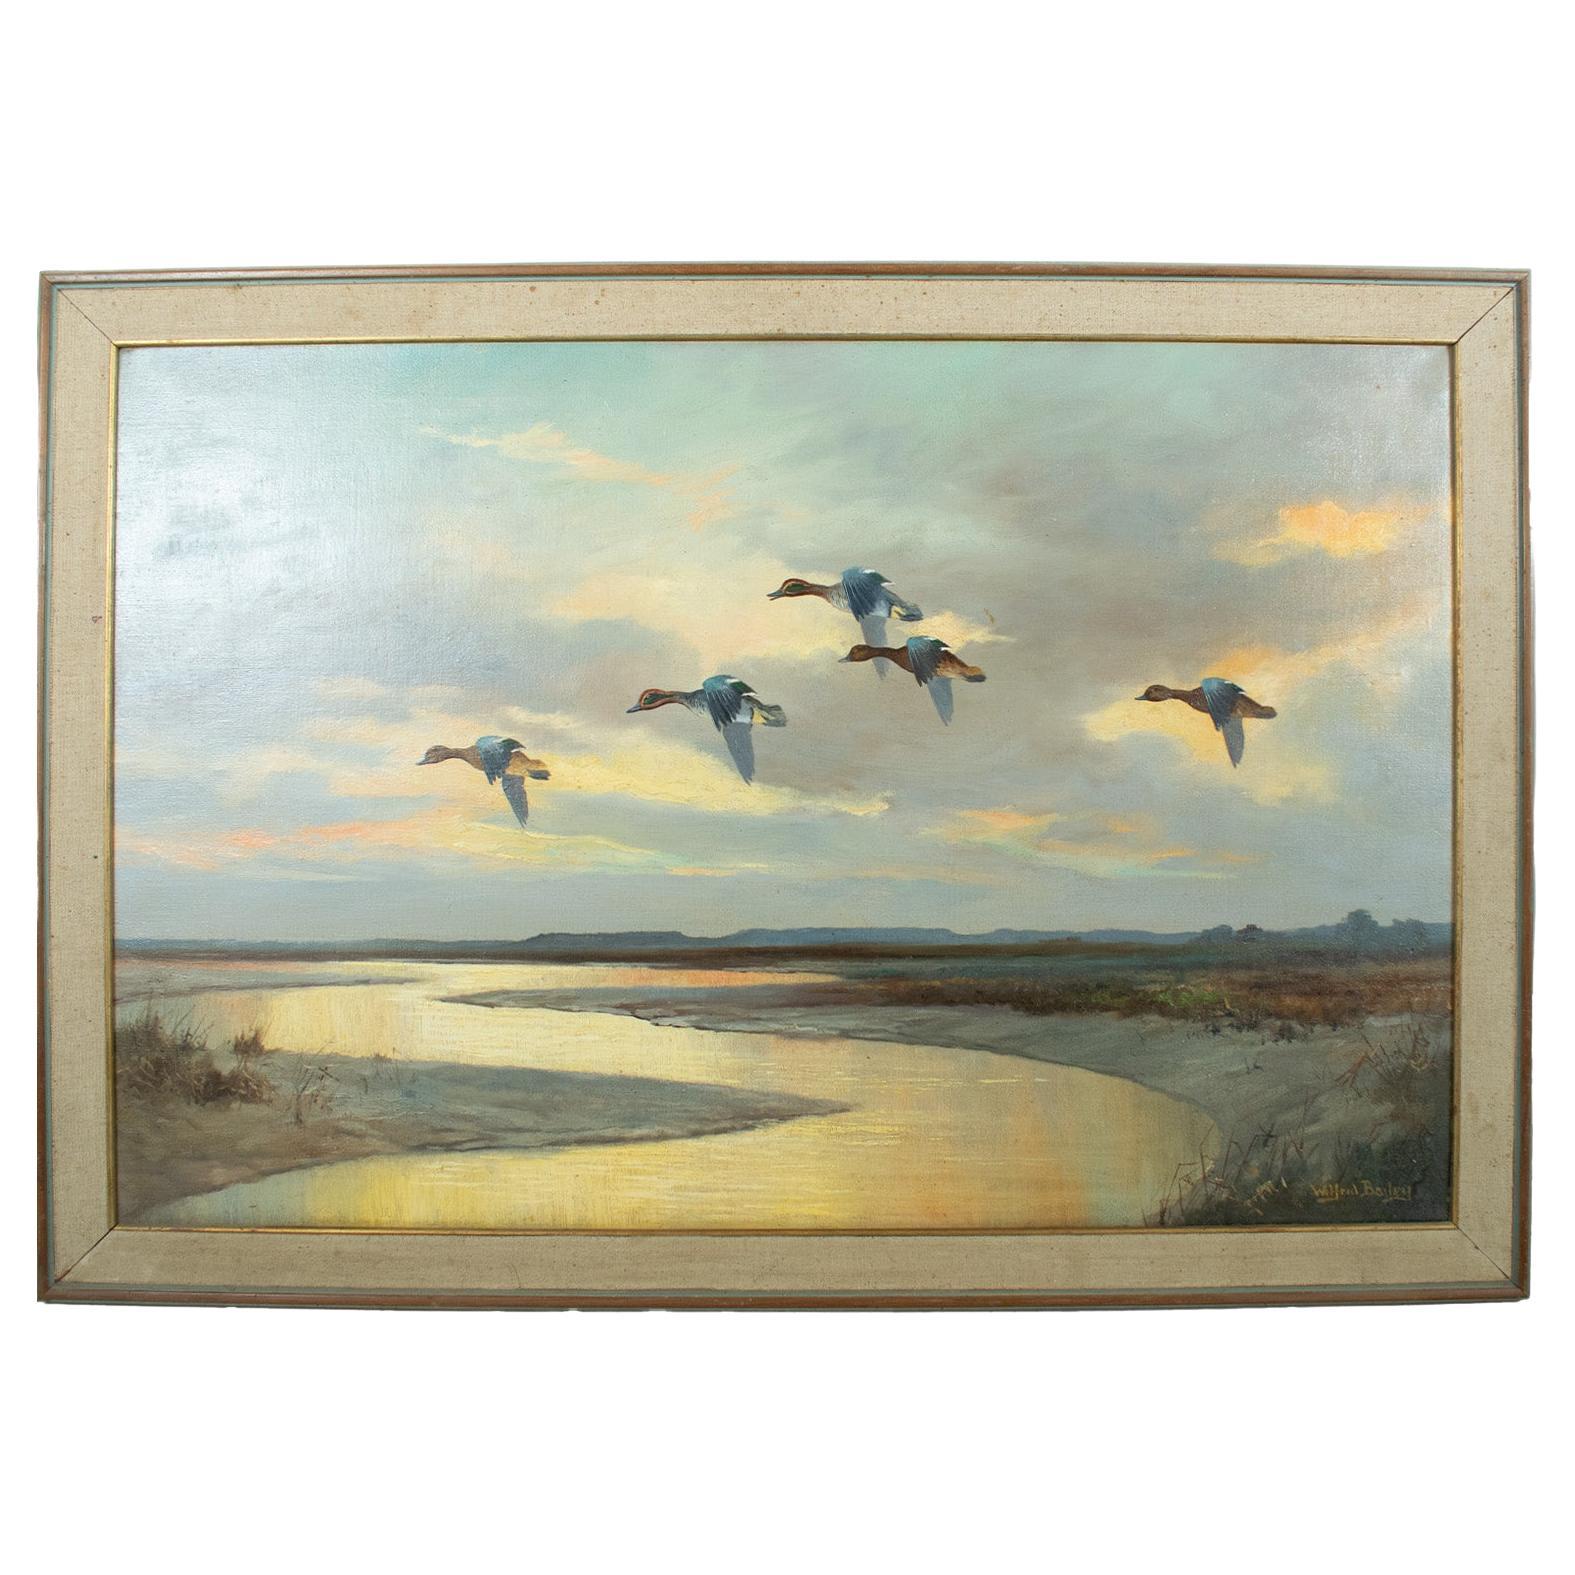 BAILEY Wilfred fl. 1942-1954 - Teal over a Widening Dyke, oil on canvas, signed For Sale